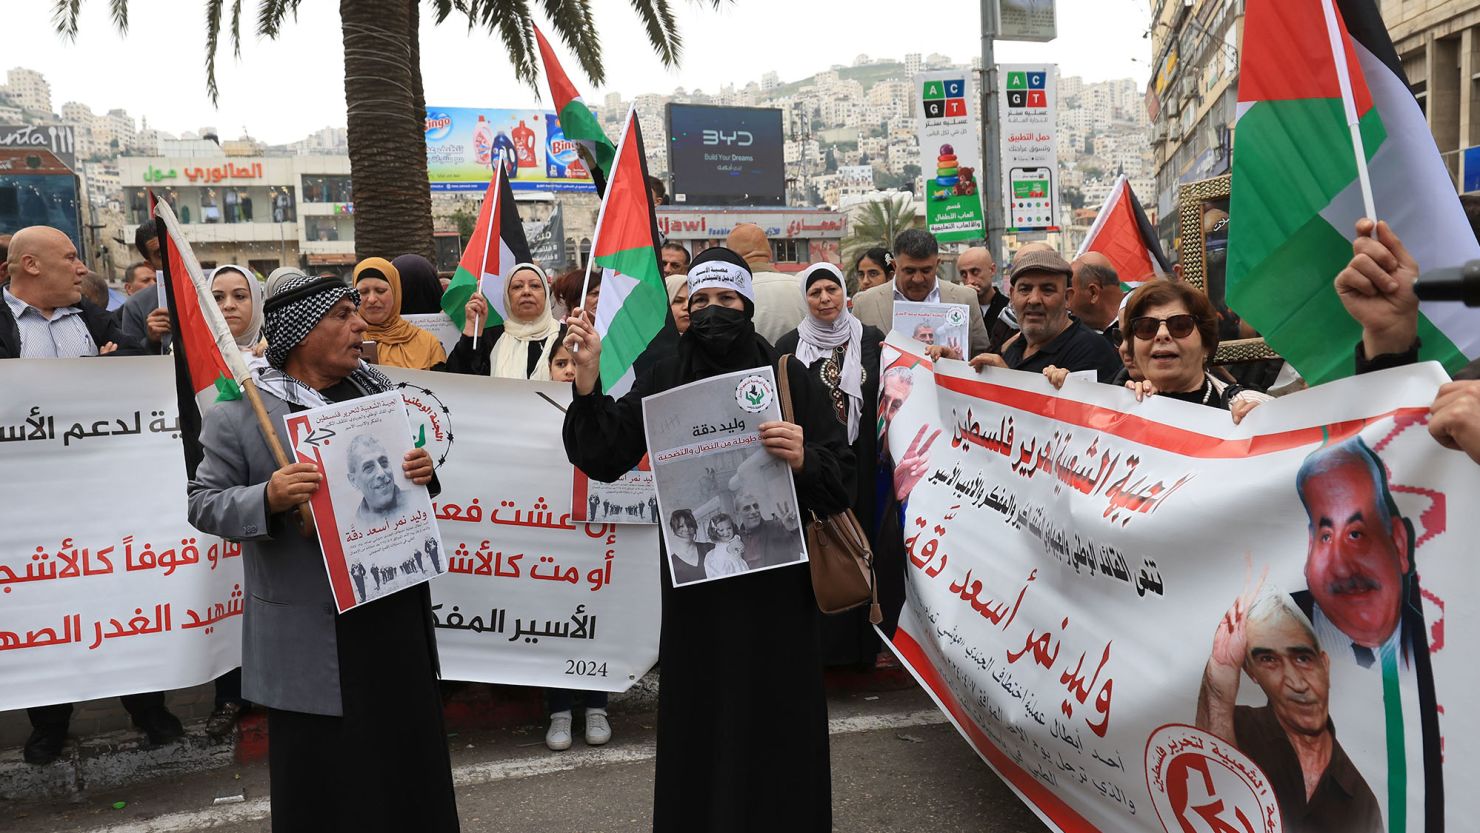 People protest following the death in an Israeli jail of terminally ill Palestinian activist and novelist Walid Daqqa, in the West Bank City of Nablus, on Monday.